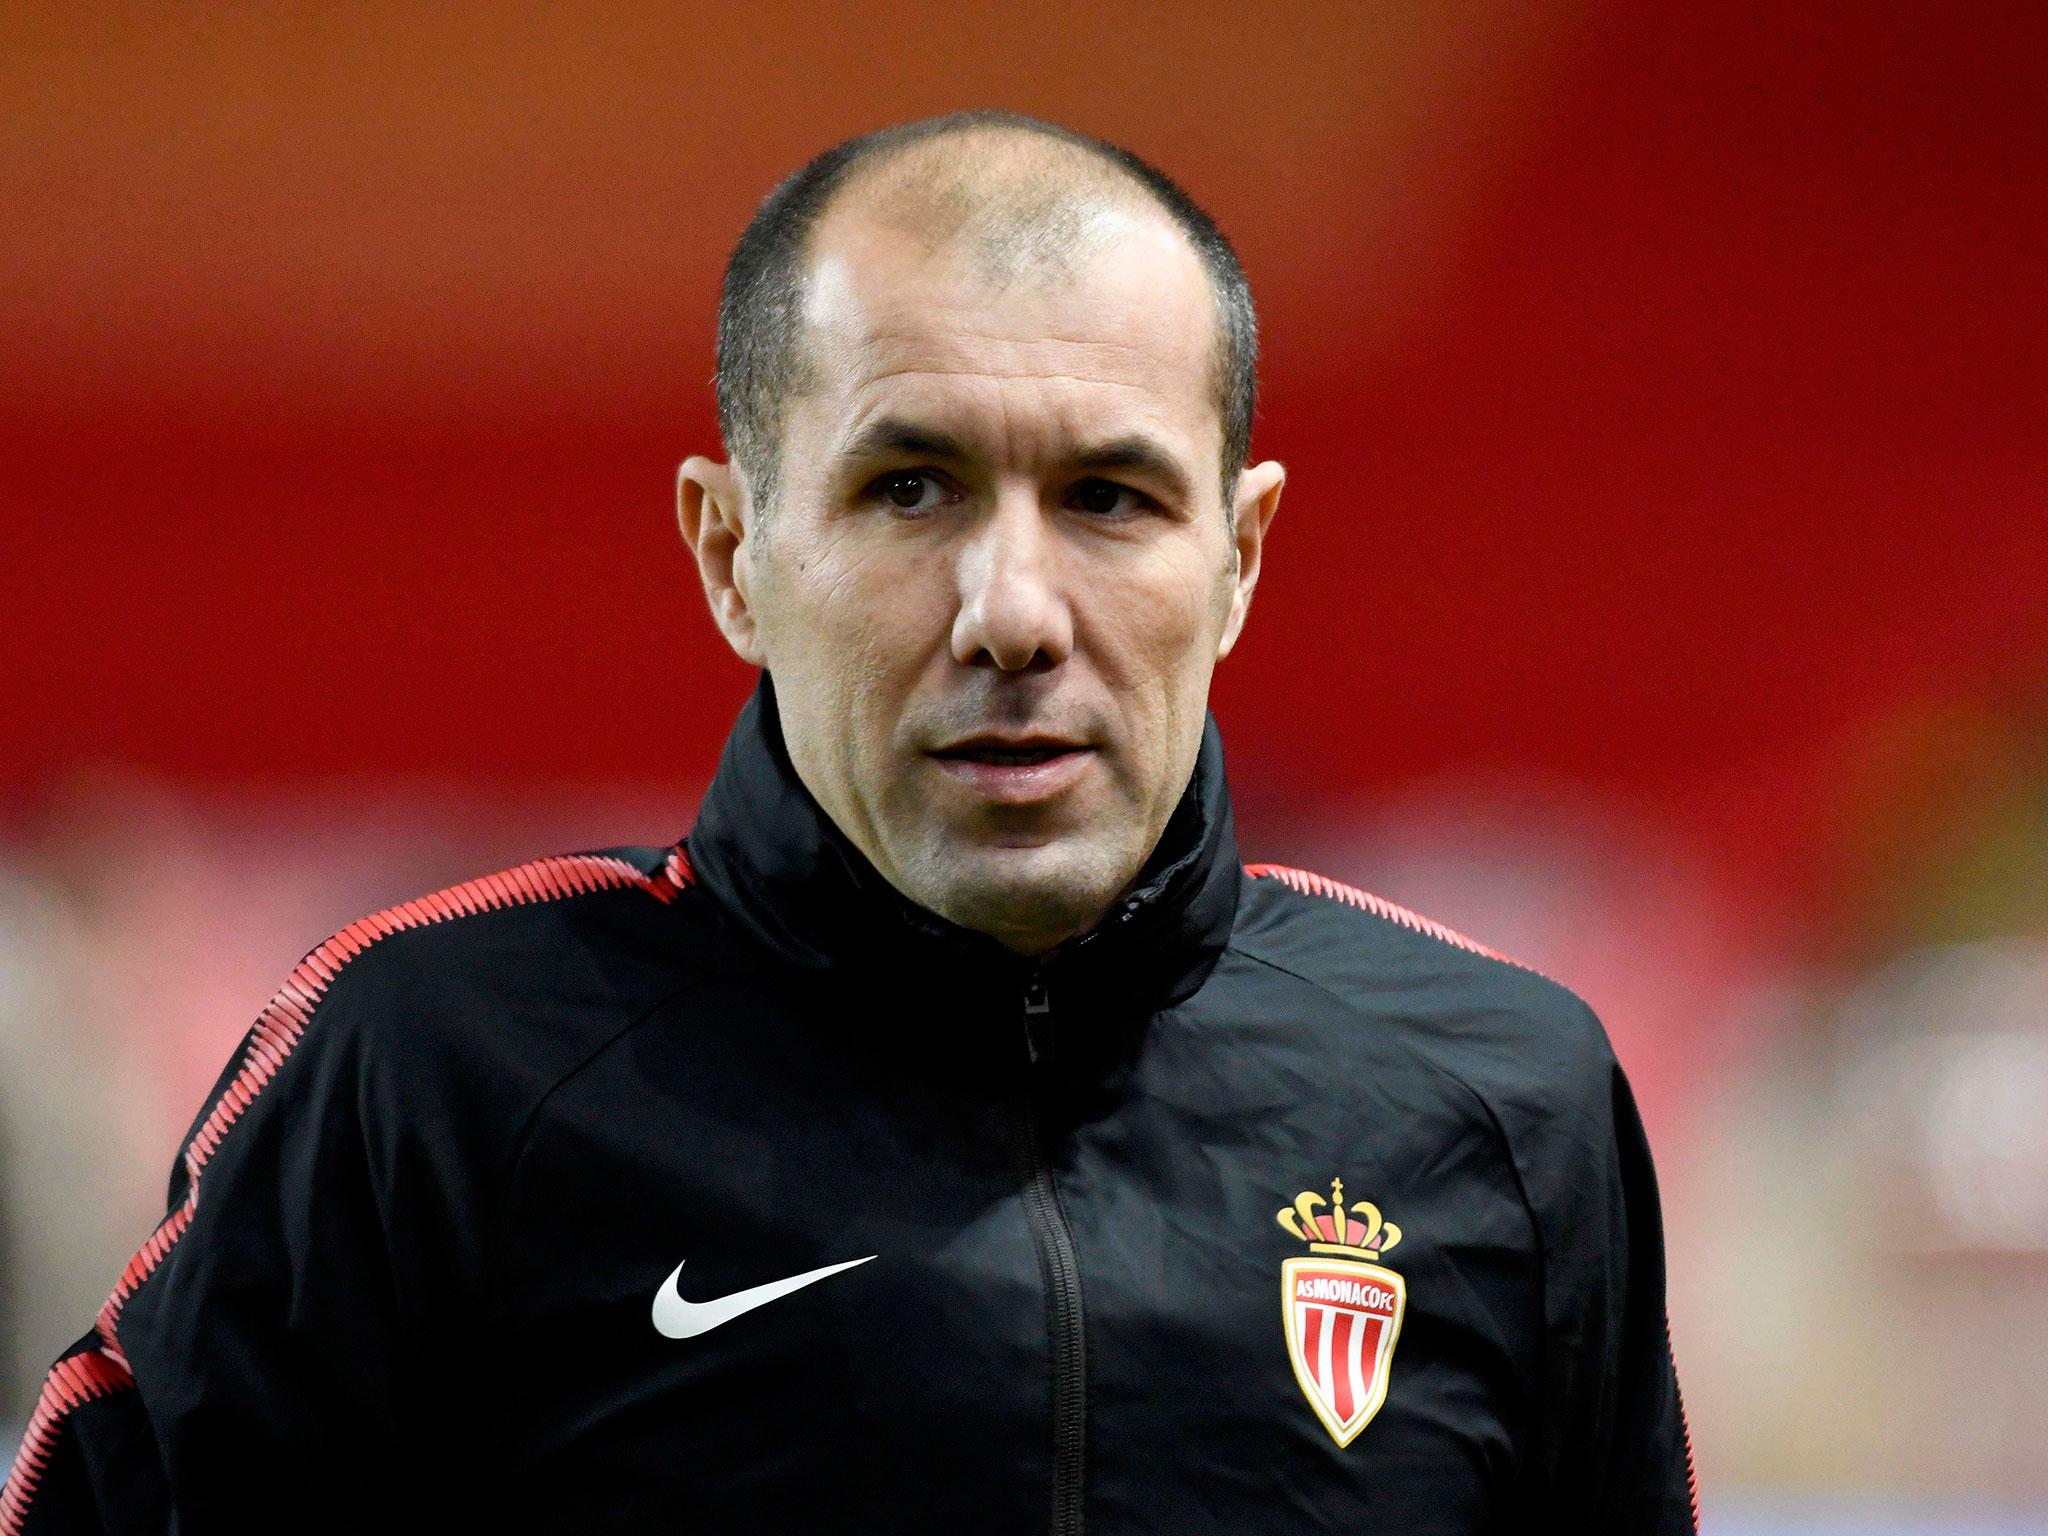 Jardim is hugely admired at Arsenal for how he has turned Monaco into one of Europe’s best sides